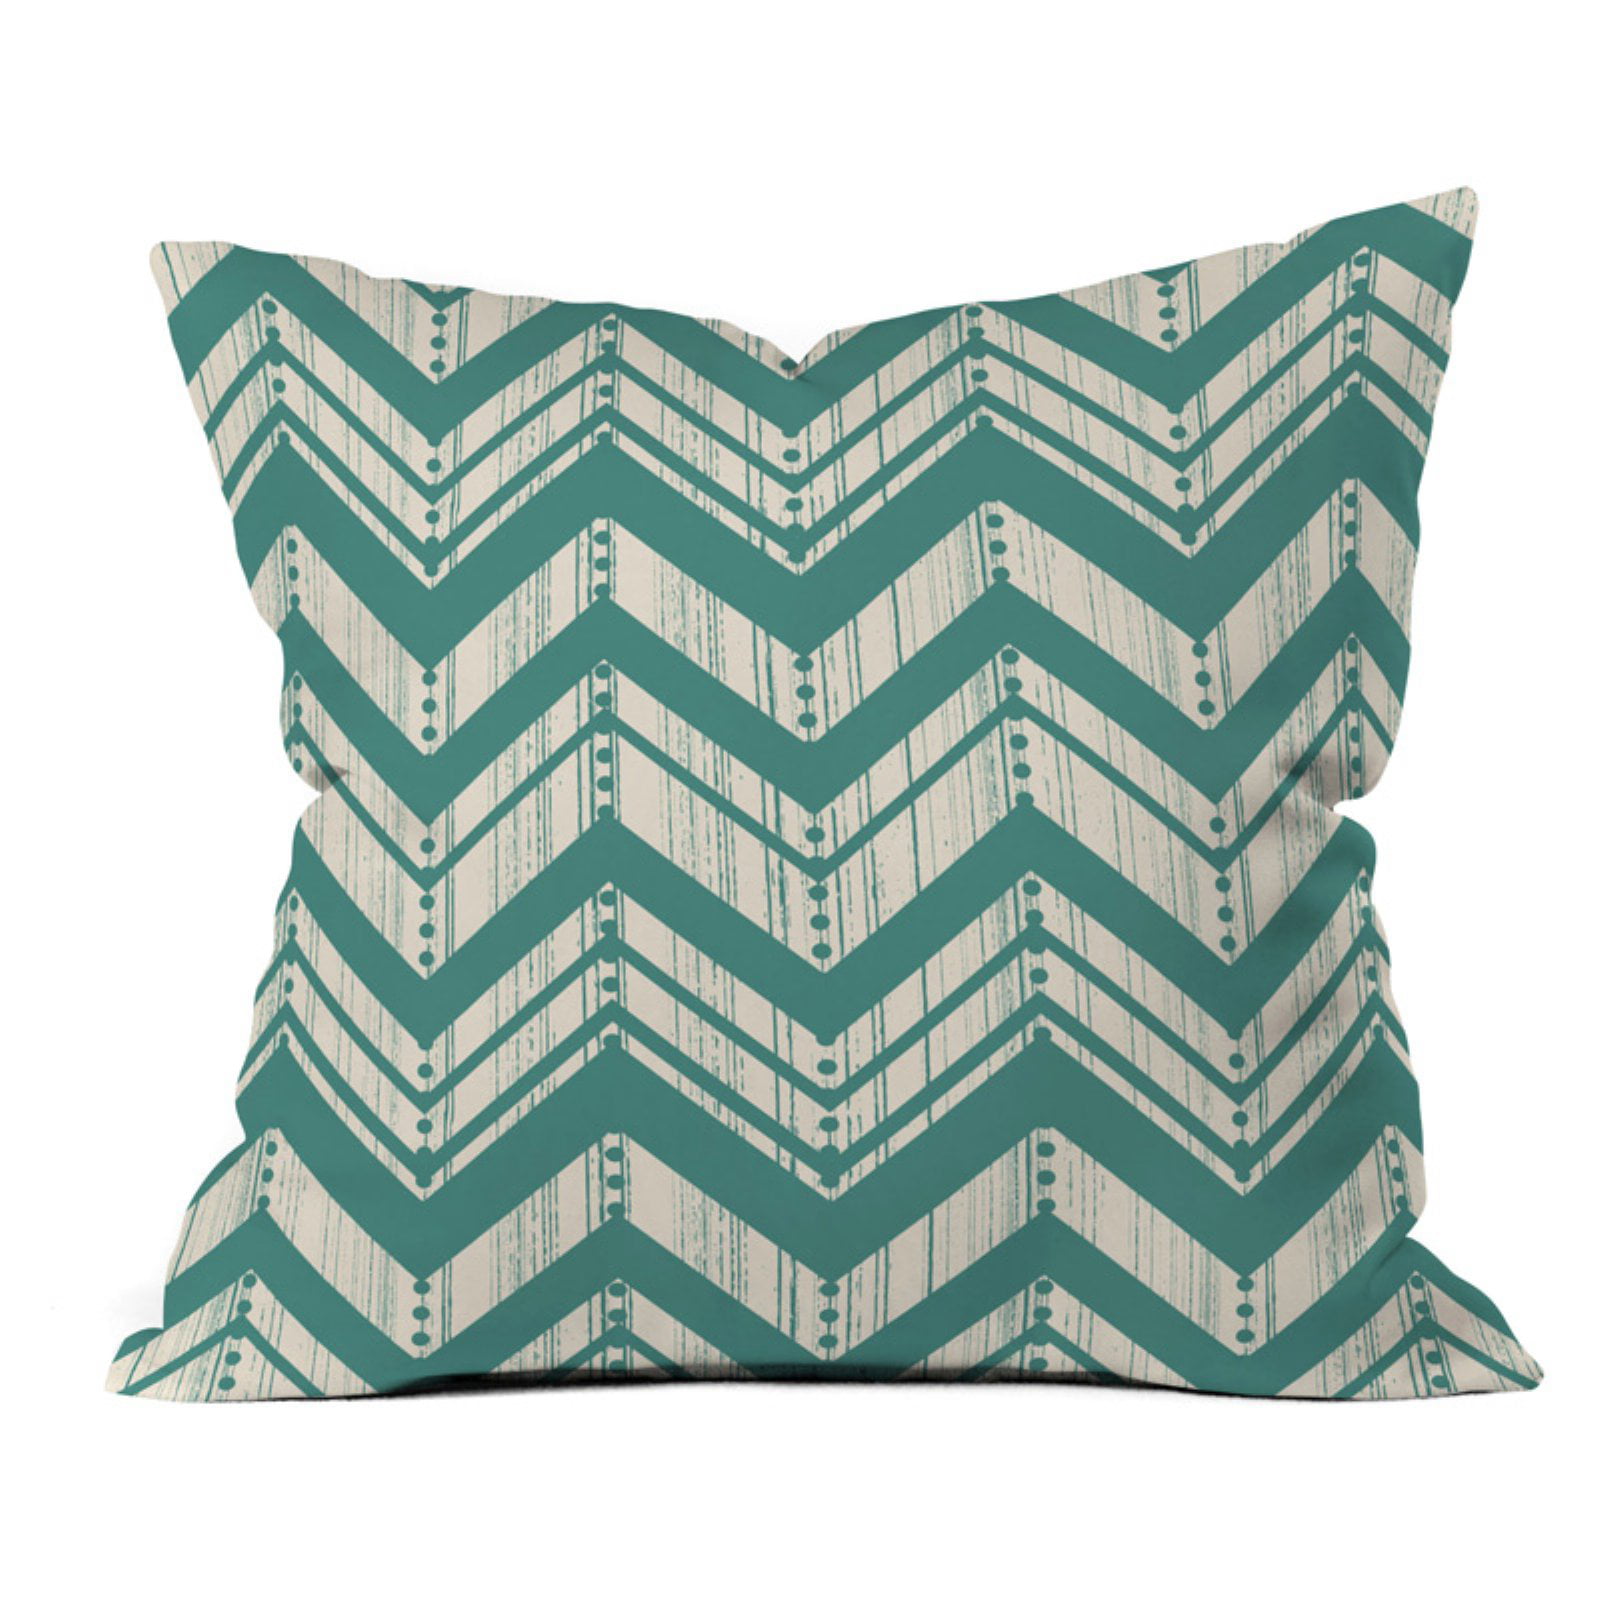 Deny Designs Arcturus Scales Outdoor Throw Pillow LG 16035-othrp16 16 x 16 Deny Designs 